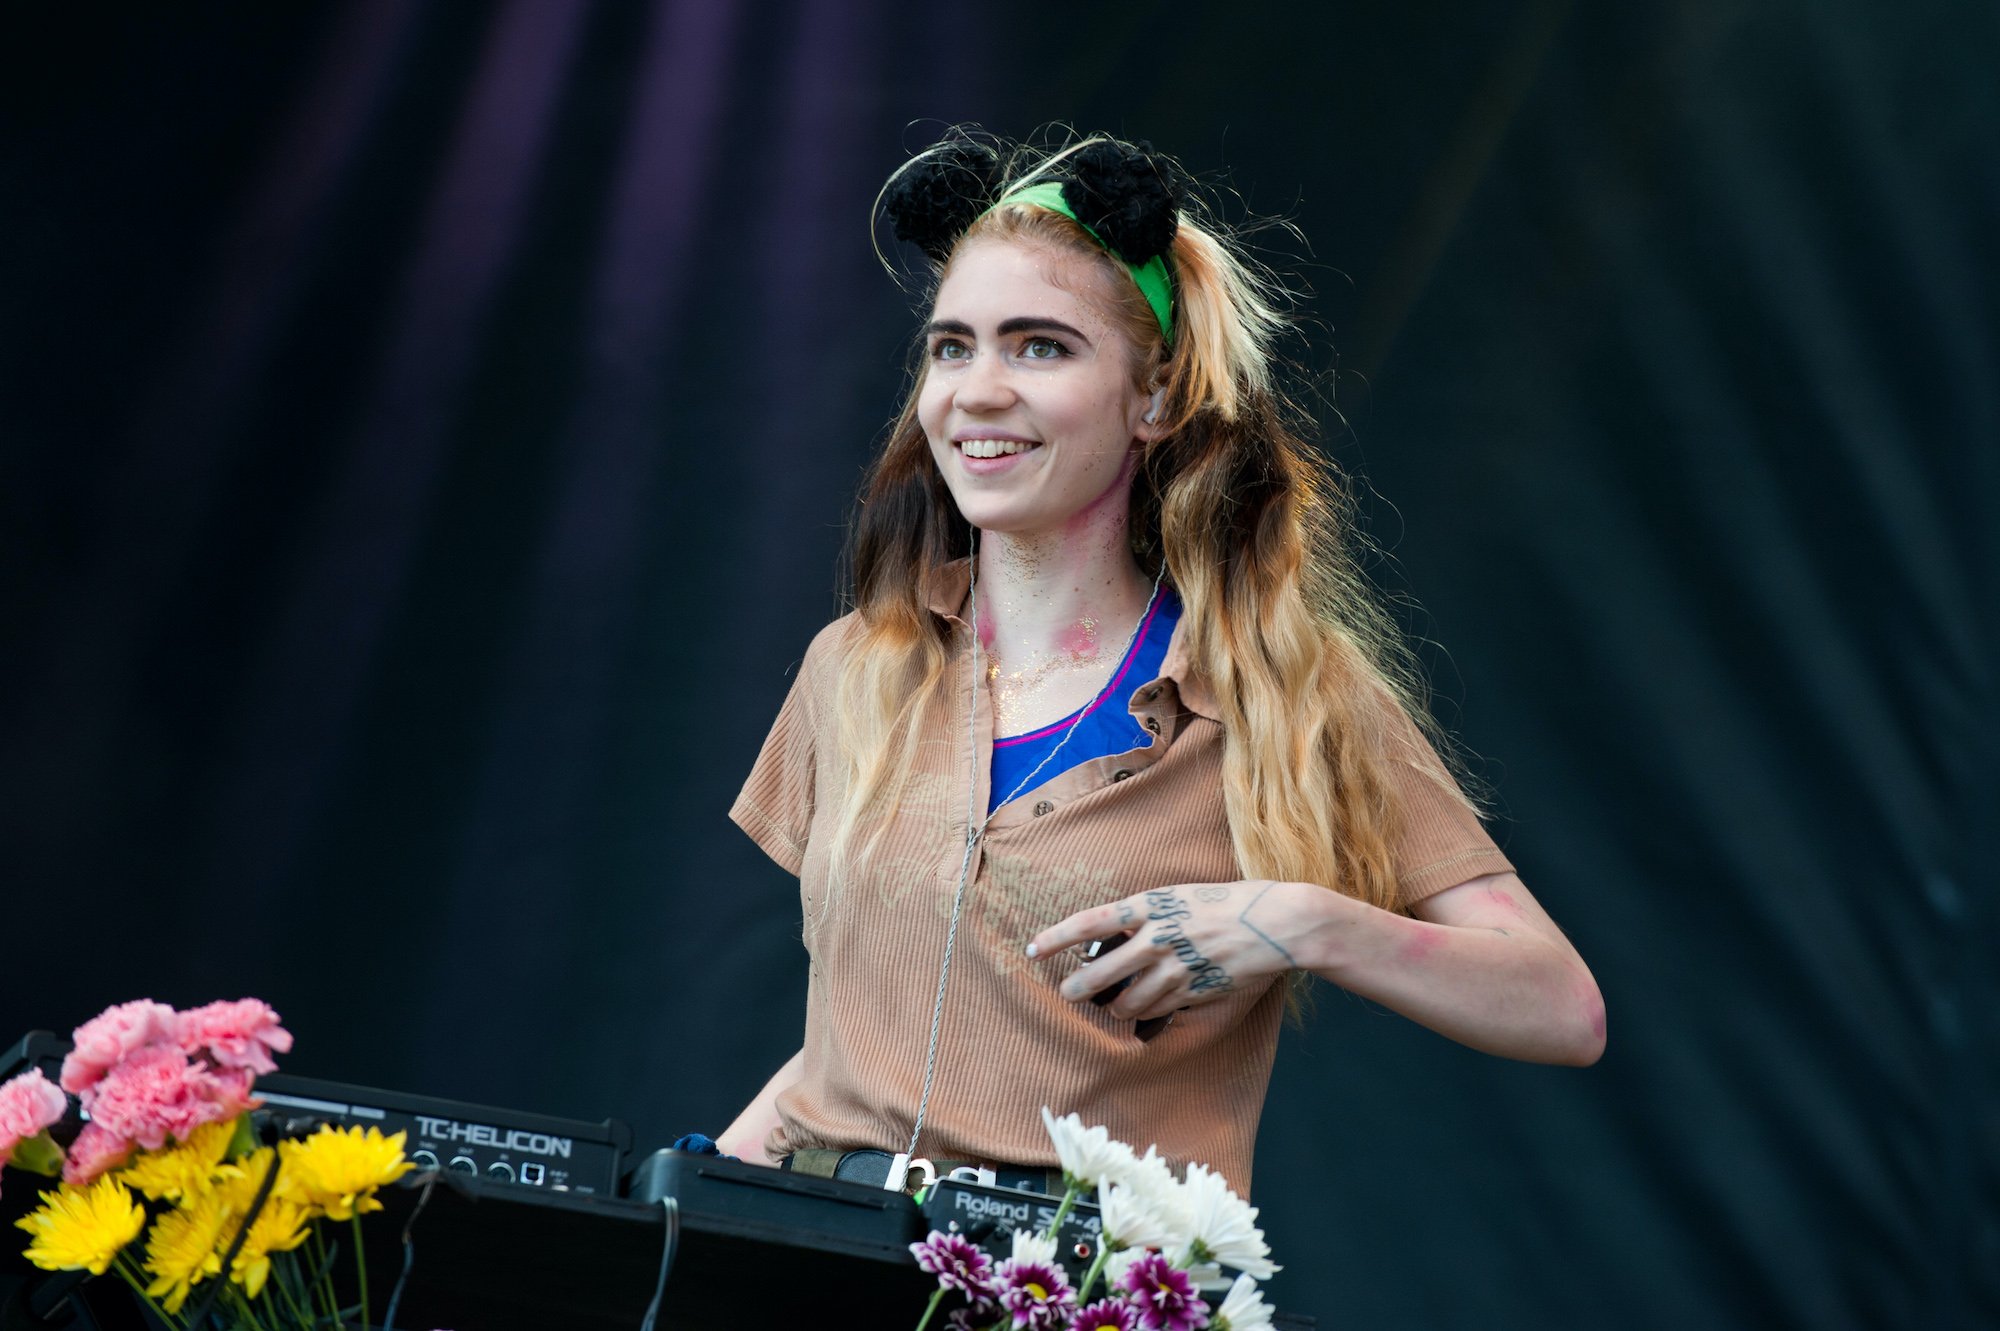 Grimes smiling, behind a keyboard and flowers, in front of a black curtain, on stage